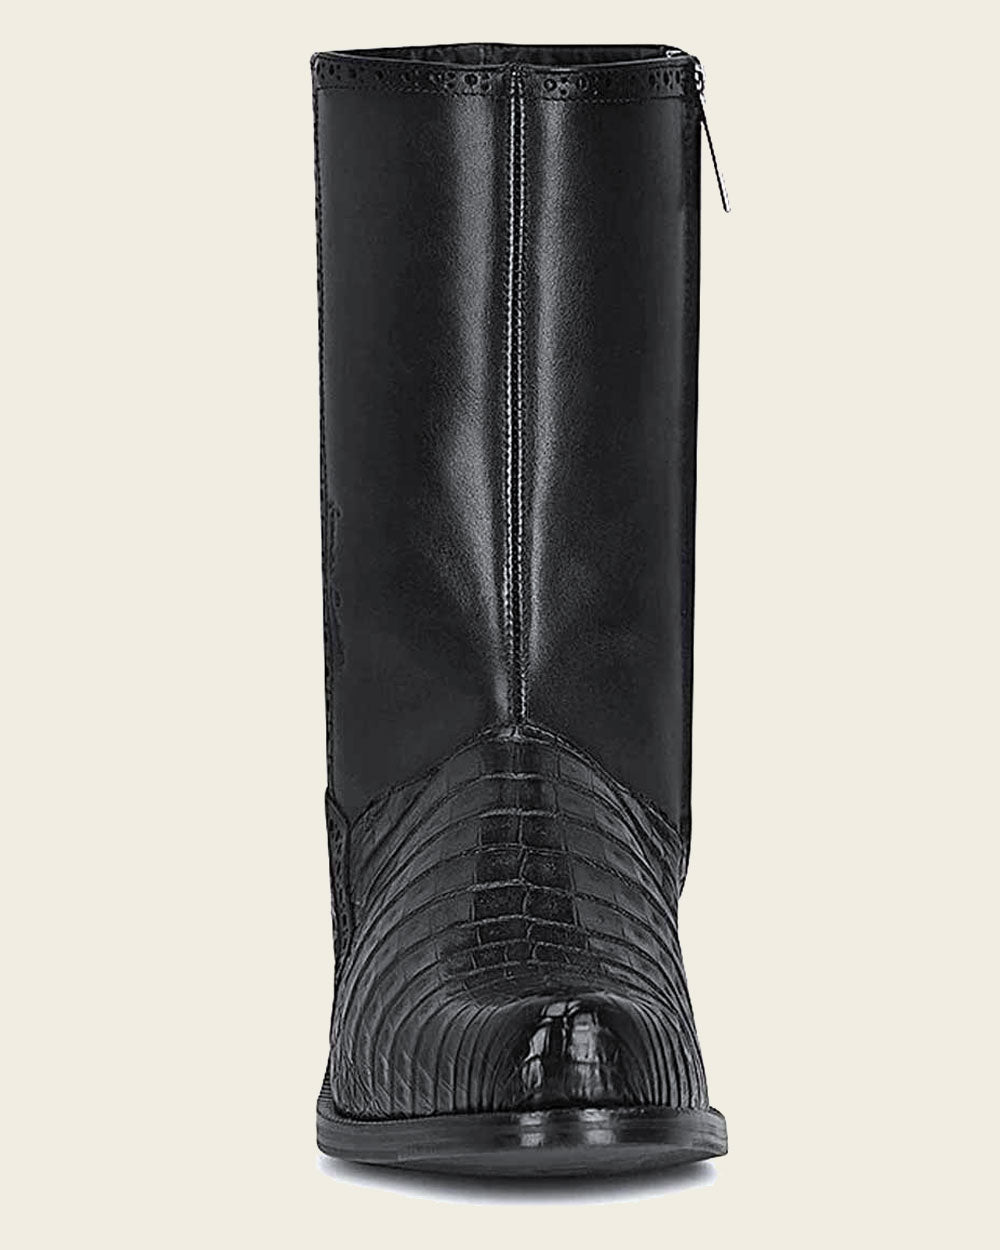 Boardroom to everyday: Elevate your style with Cuadra's black boots.